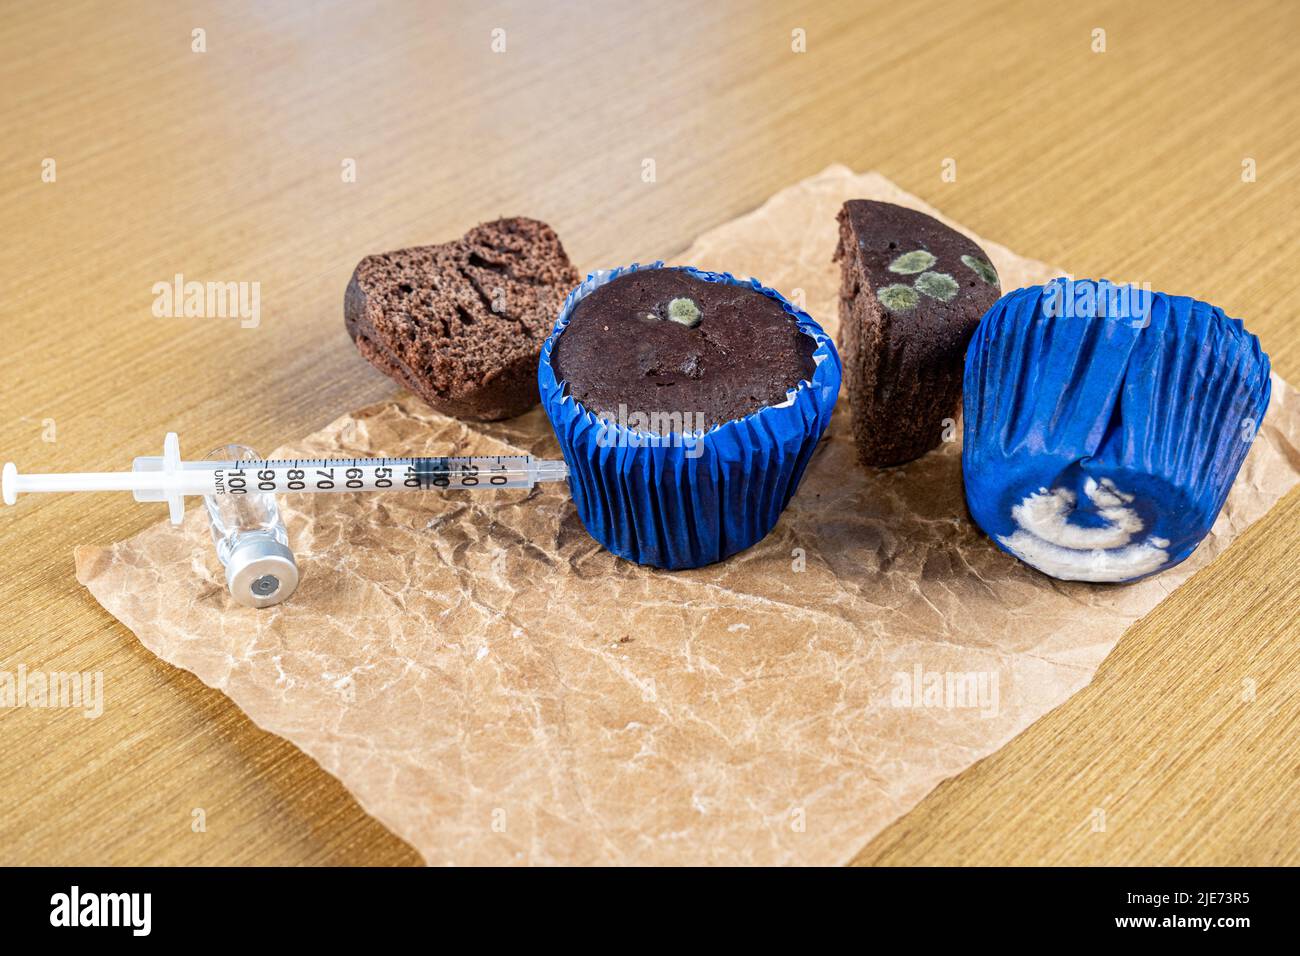 Syringe injecting insulin into moldy chocolate muffin side view. Stock Photo